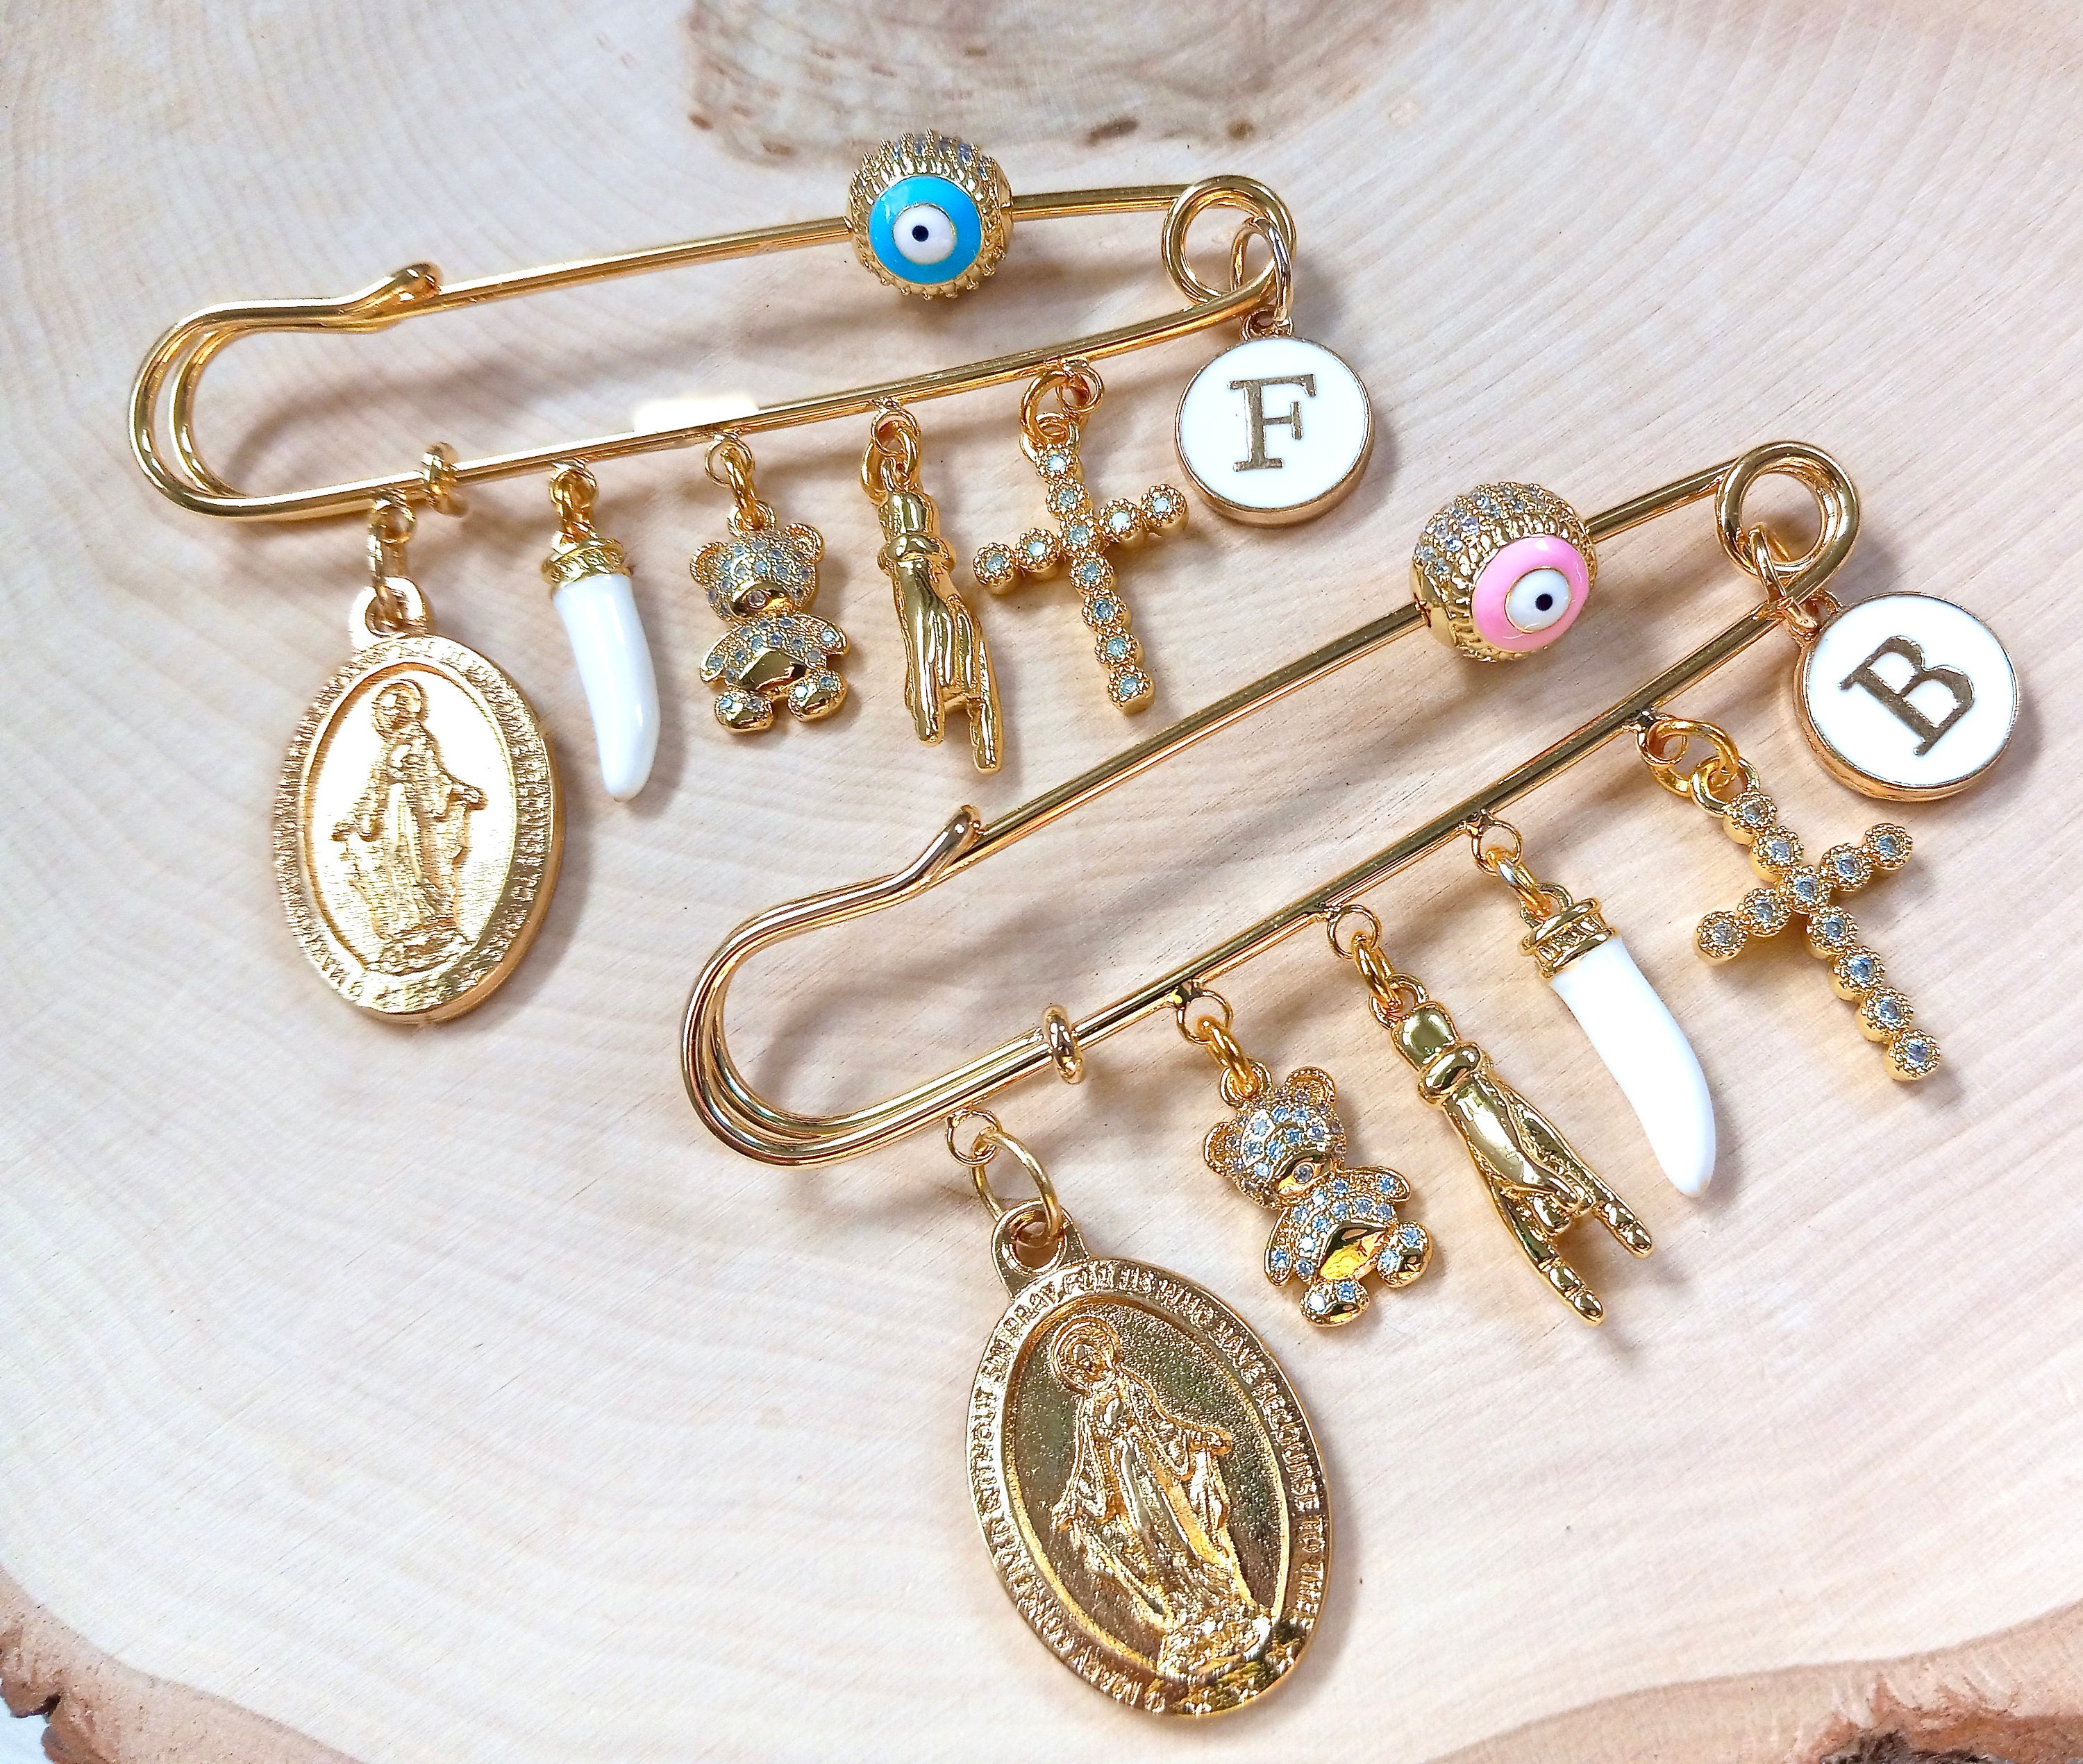 Rhinestone Safety Pin, Jumbo Safety Pins 2/3 Classic Safety Pin, Brooch Pin  High Quality 5 SET 